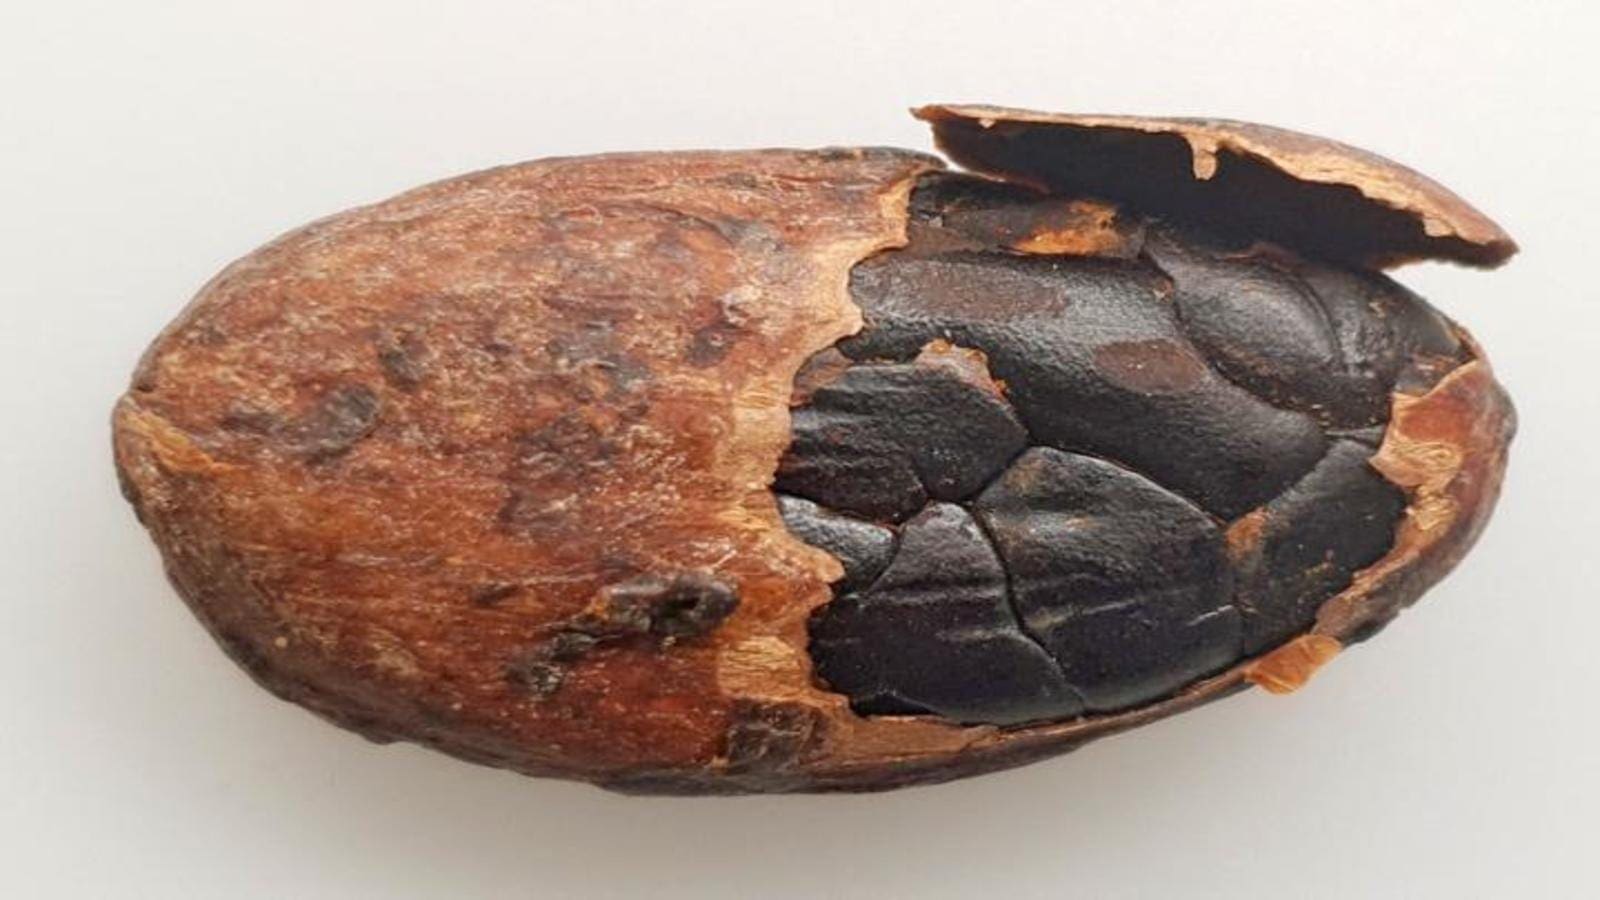 New research identifies key odorants that chiefly contribute to off-flavors in fermented cocoa